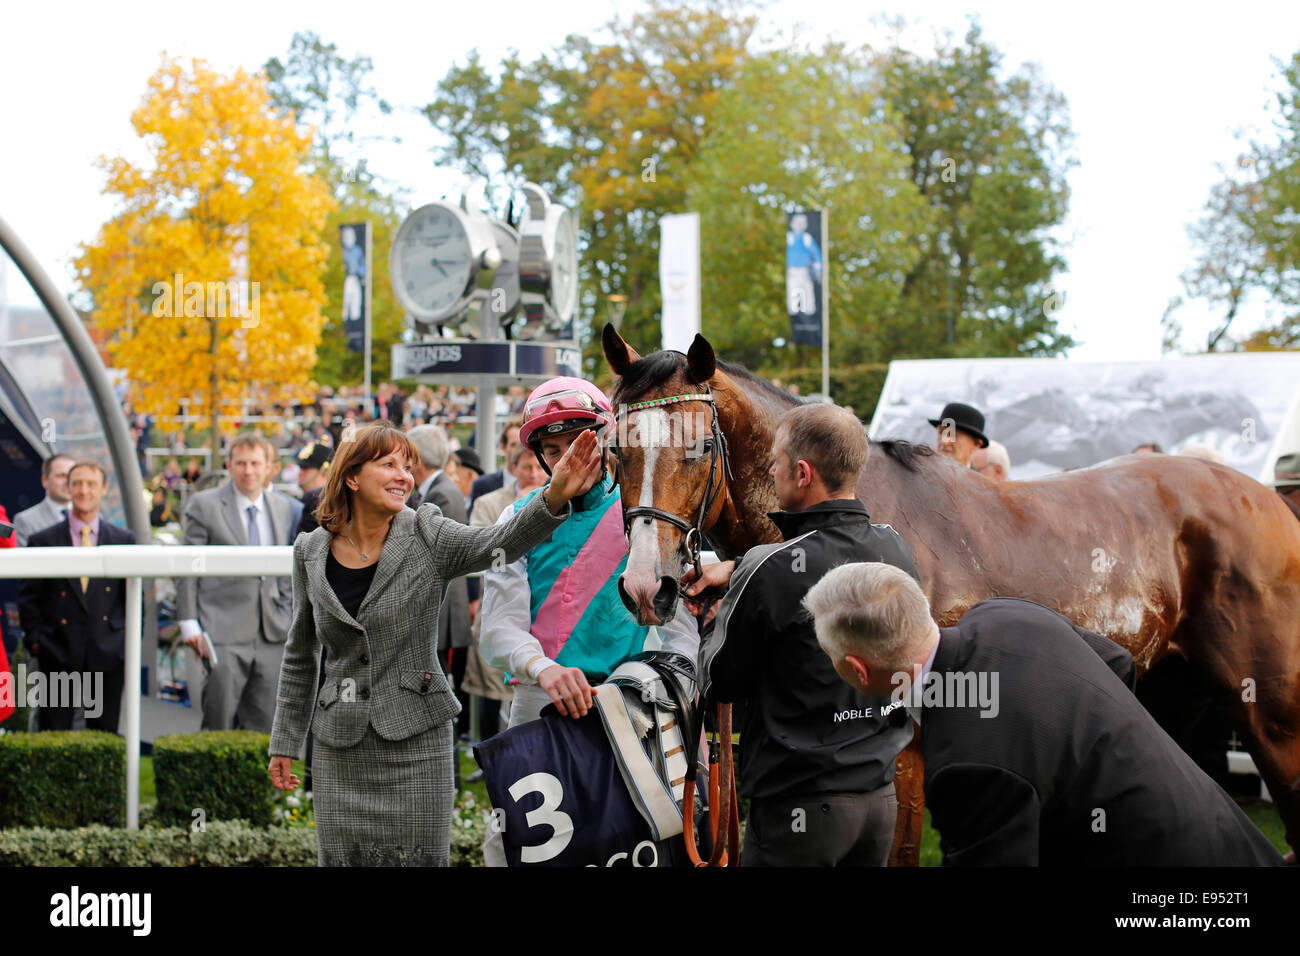 18 10 2014 Ascot Winners Presentation With Lady Jane Cecil And James